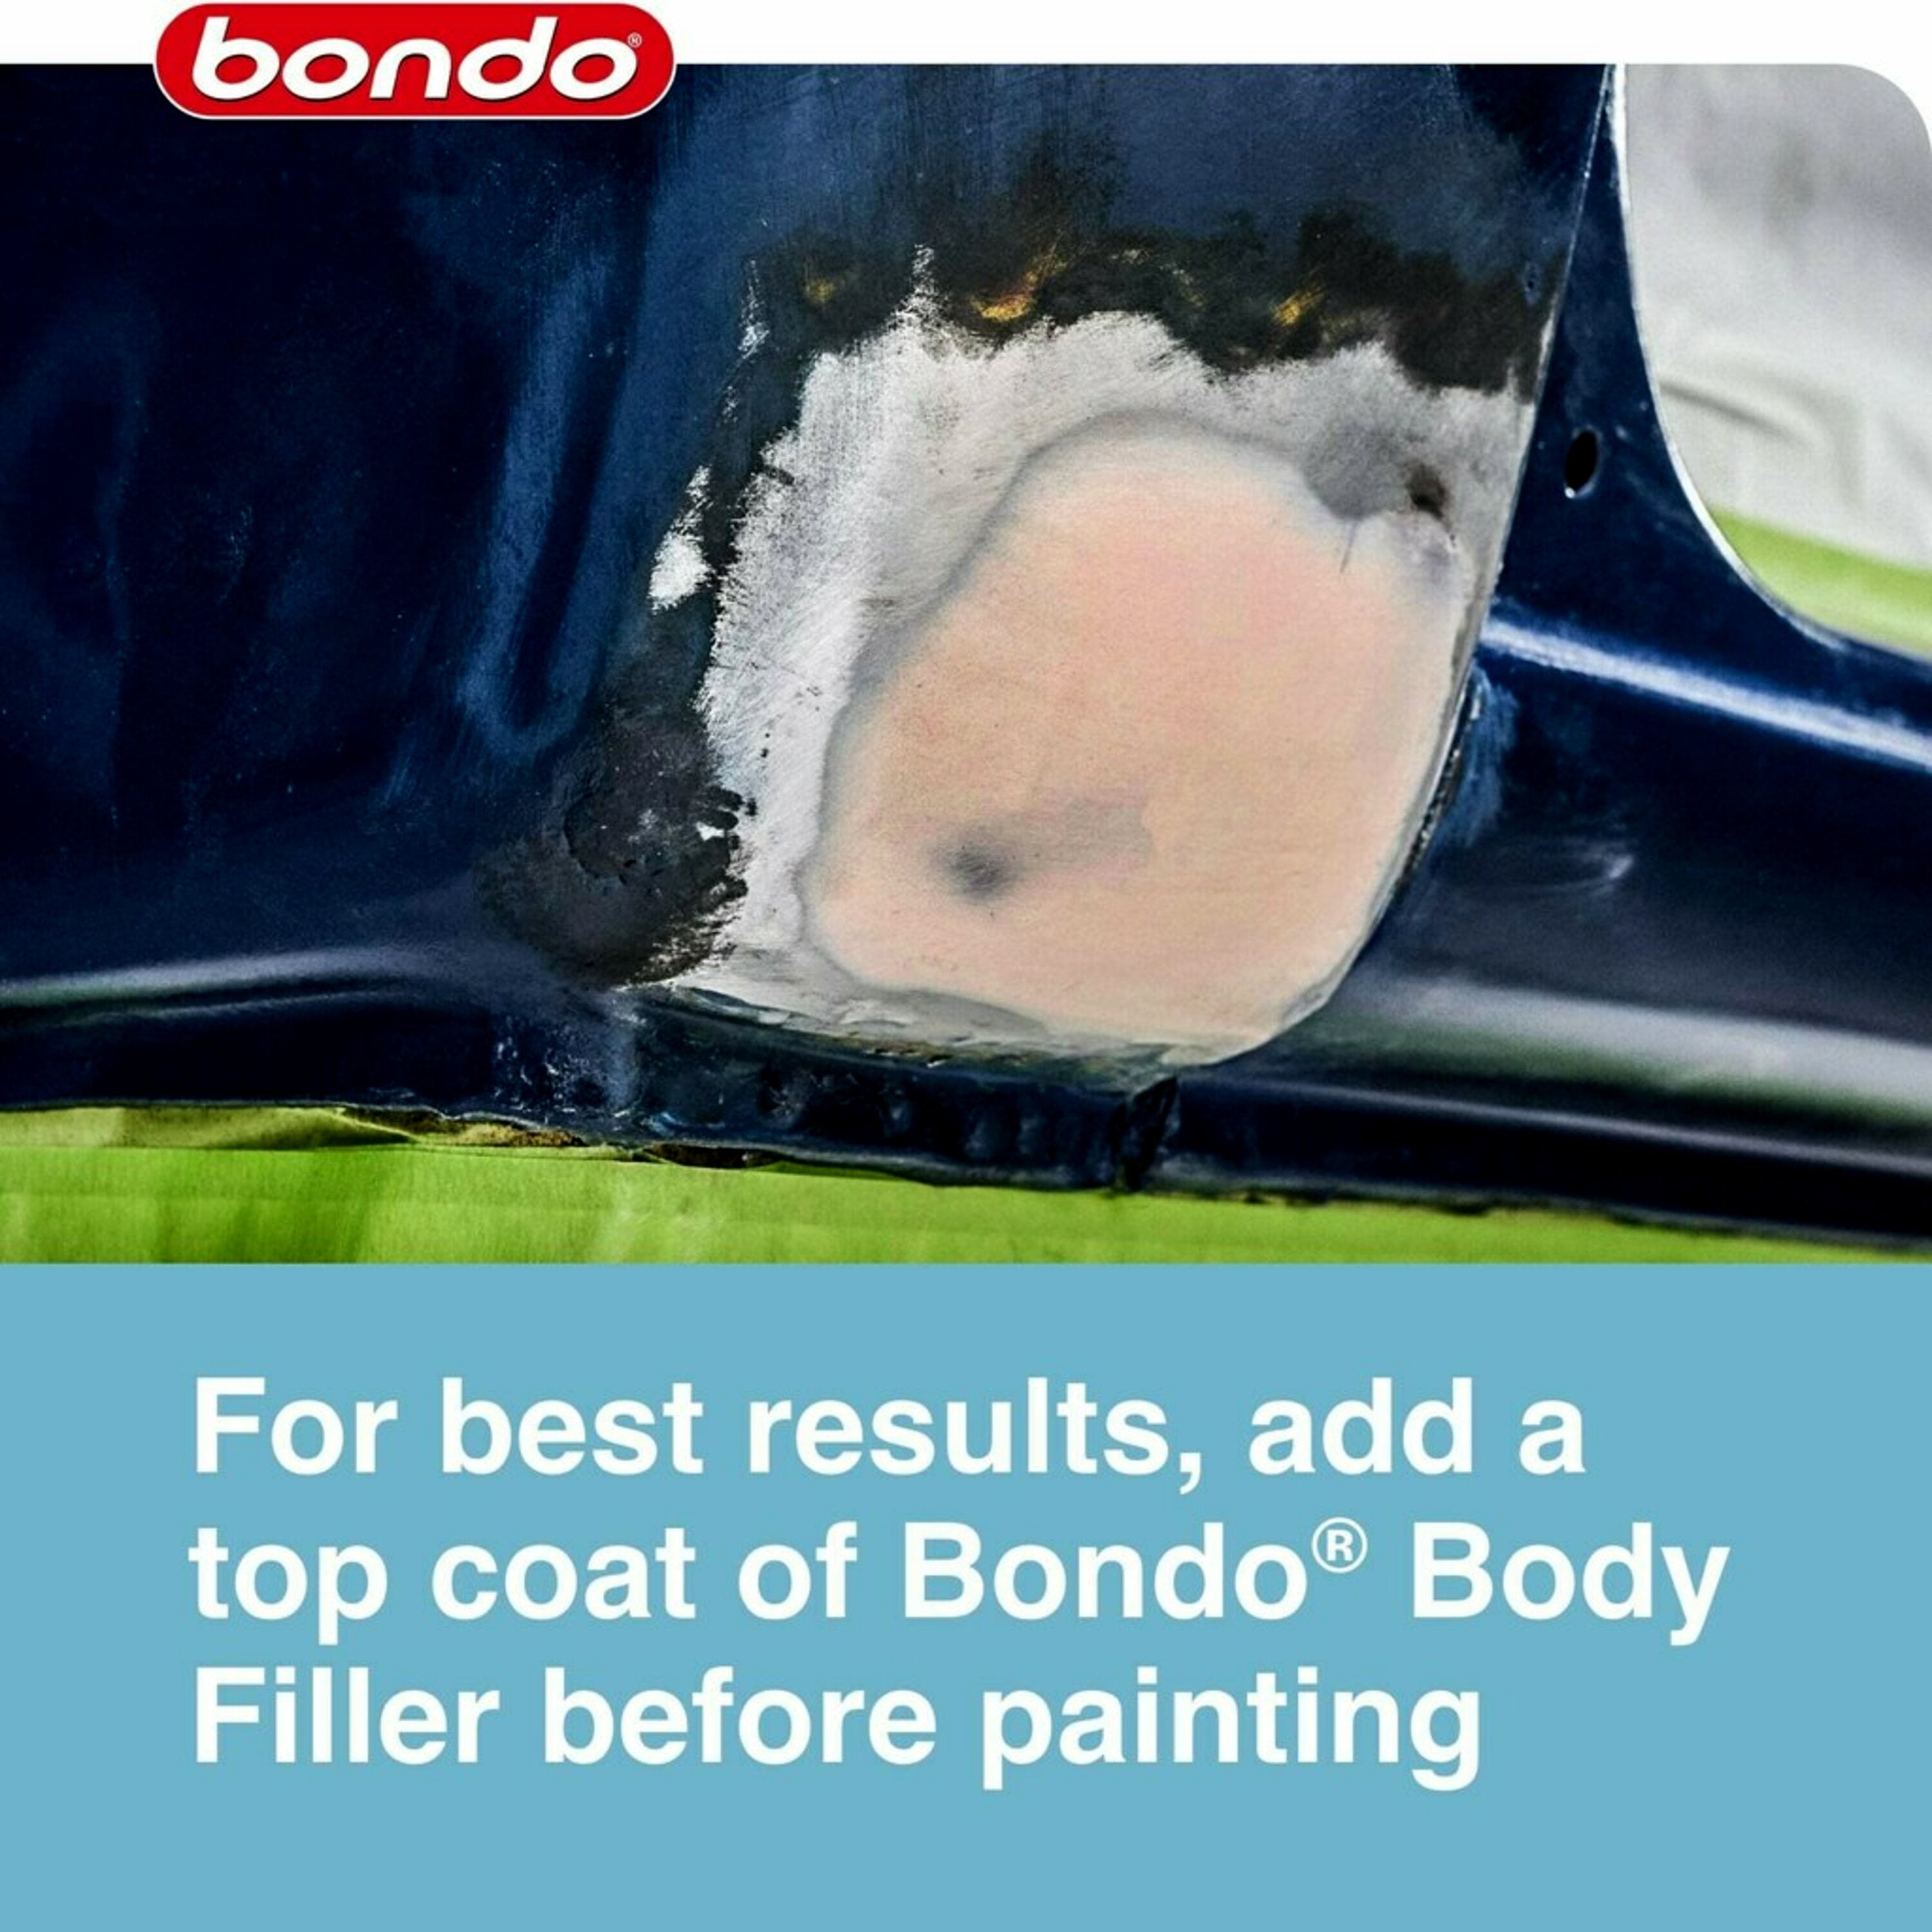 Getting the Best Results with Bondo Body Filler